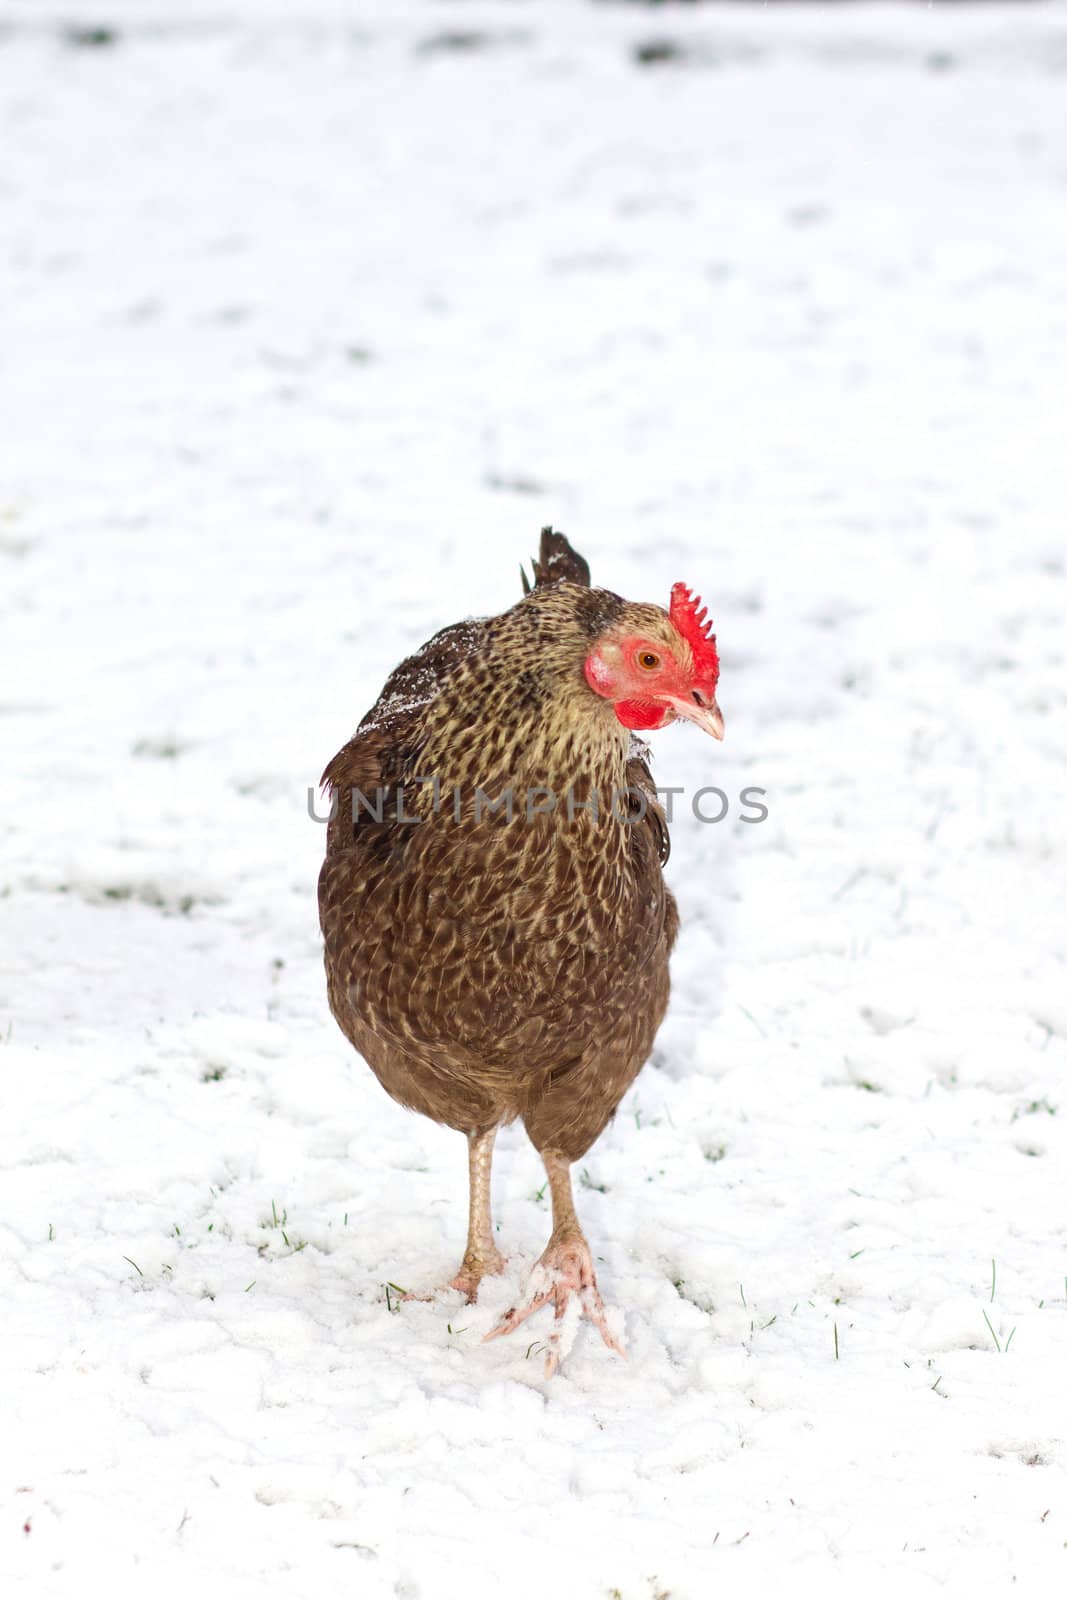 chicken walking in the winter snow by smikeymikey1